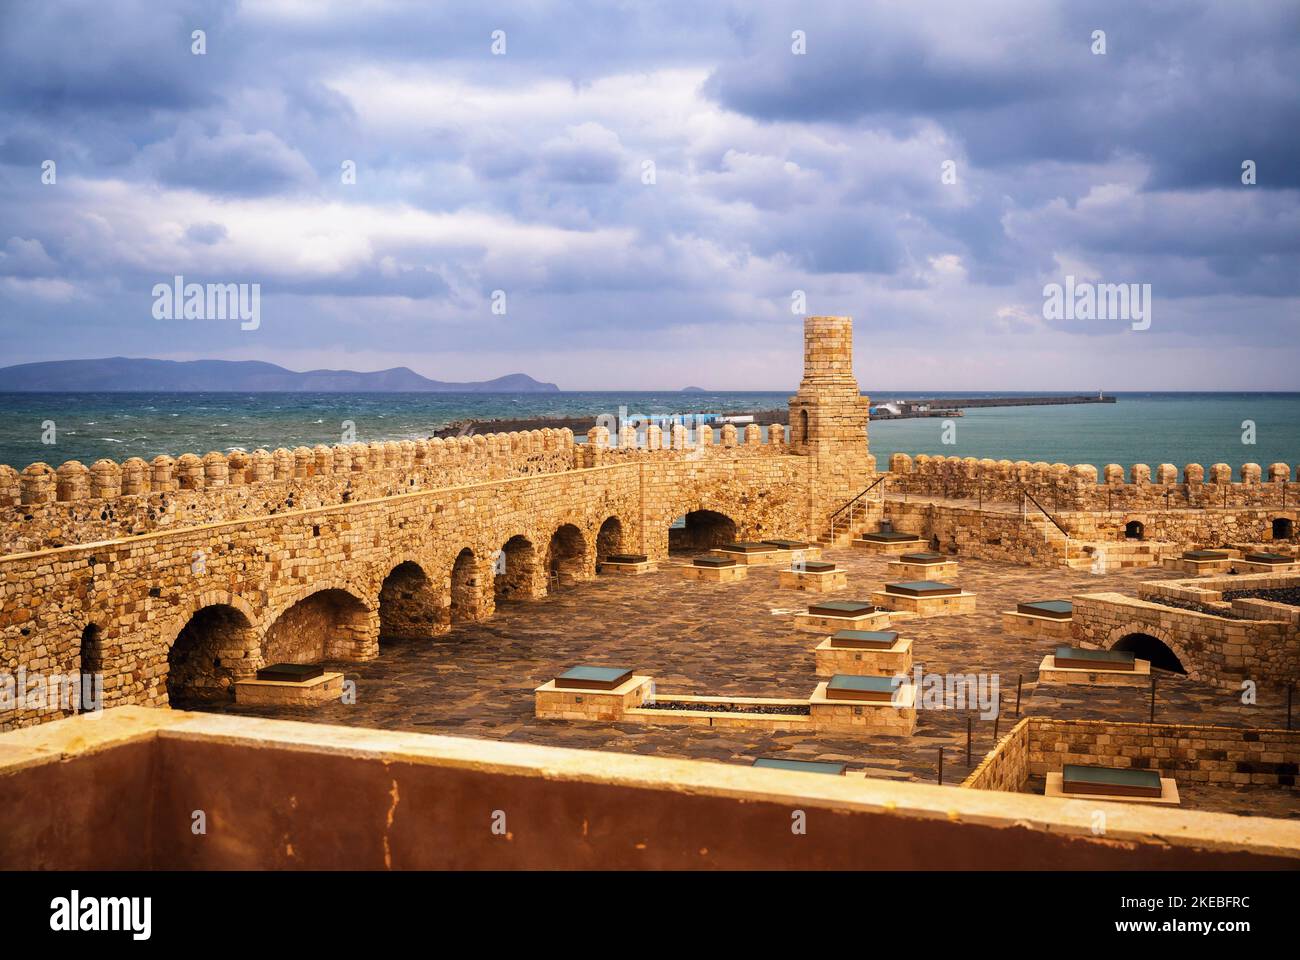 Fortress Koules (Rocca al Mare), upper courtyard, gate, tower and fortifications in seaside. Heraklion, Crete, Greece. Stock Photo